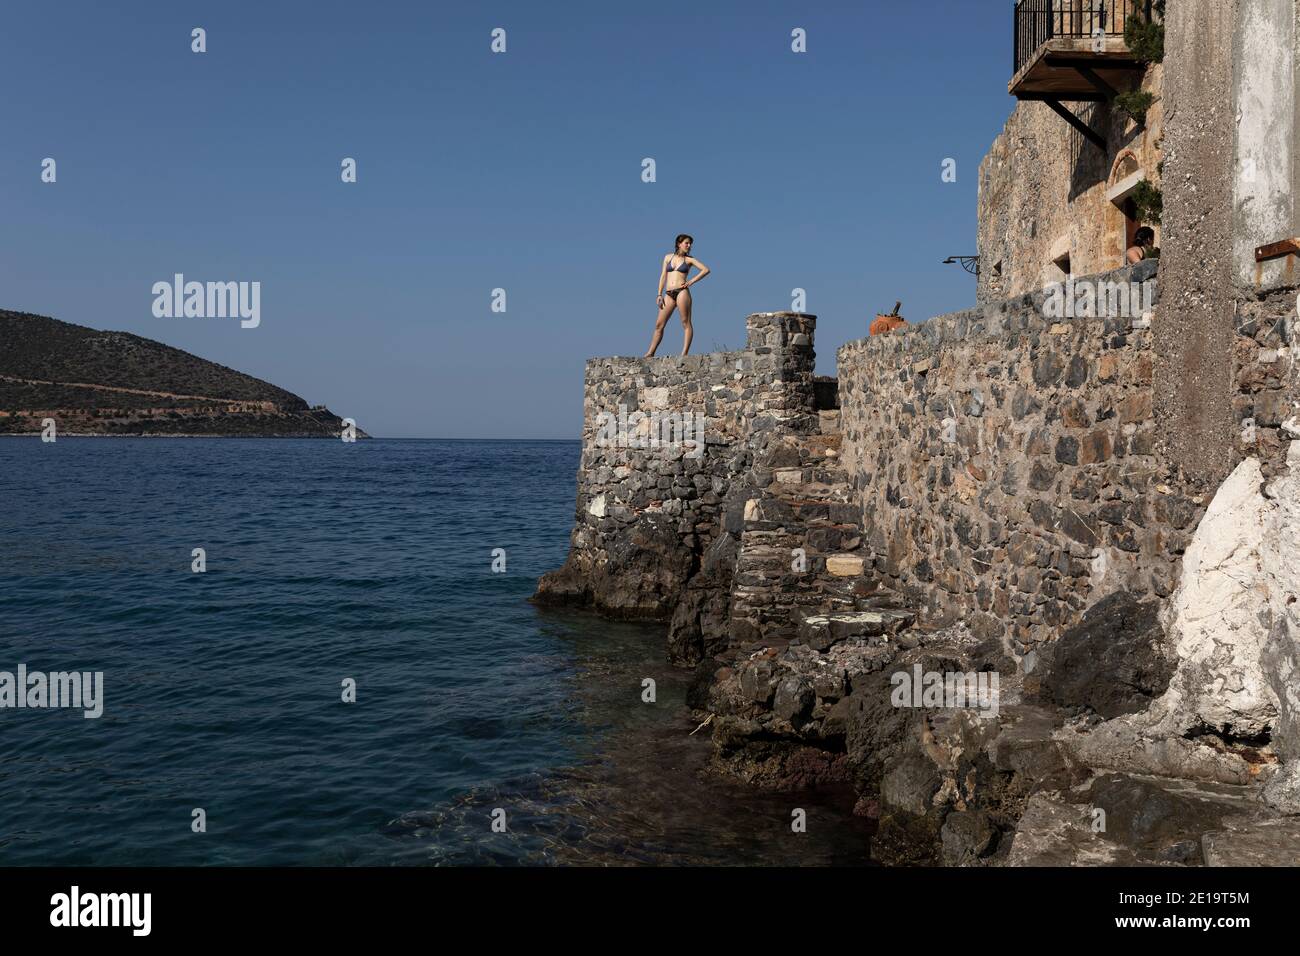 A girl stands by the sea at the port of Kiparissi village, Peloponnese region, Greece on July 28, 2020. / Ενα κορίτσι στέκεται στην προβλήτα του λιμαν Stock Photo